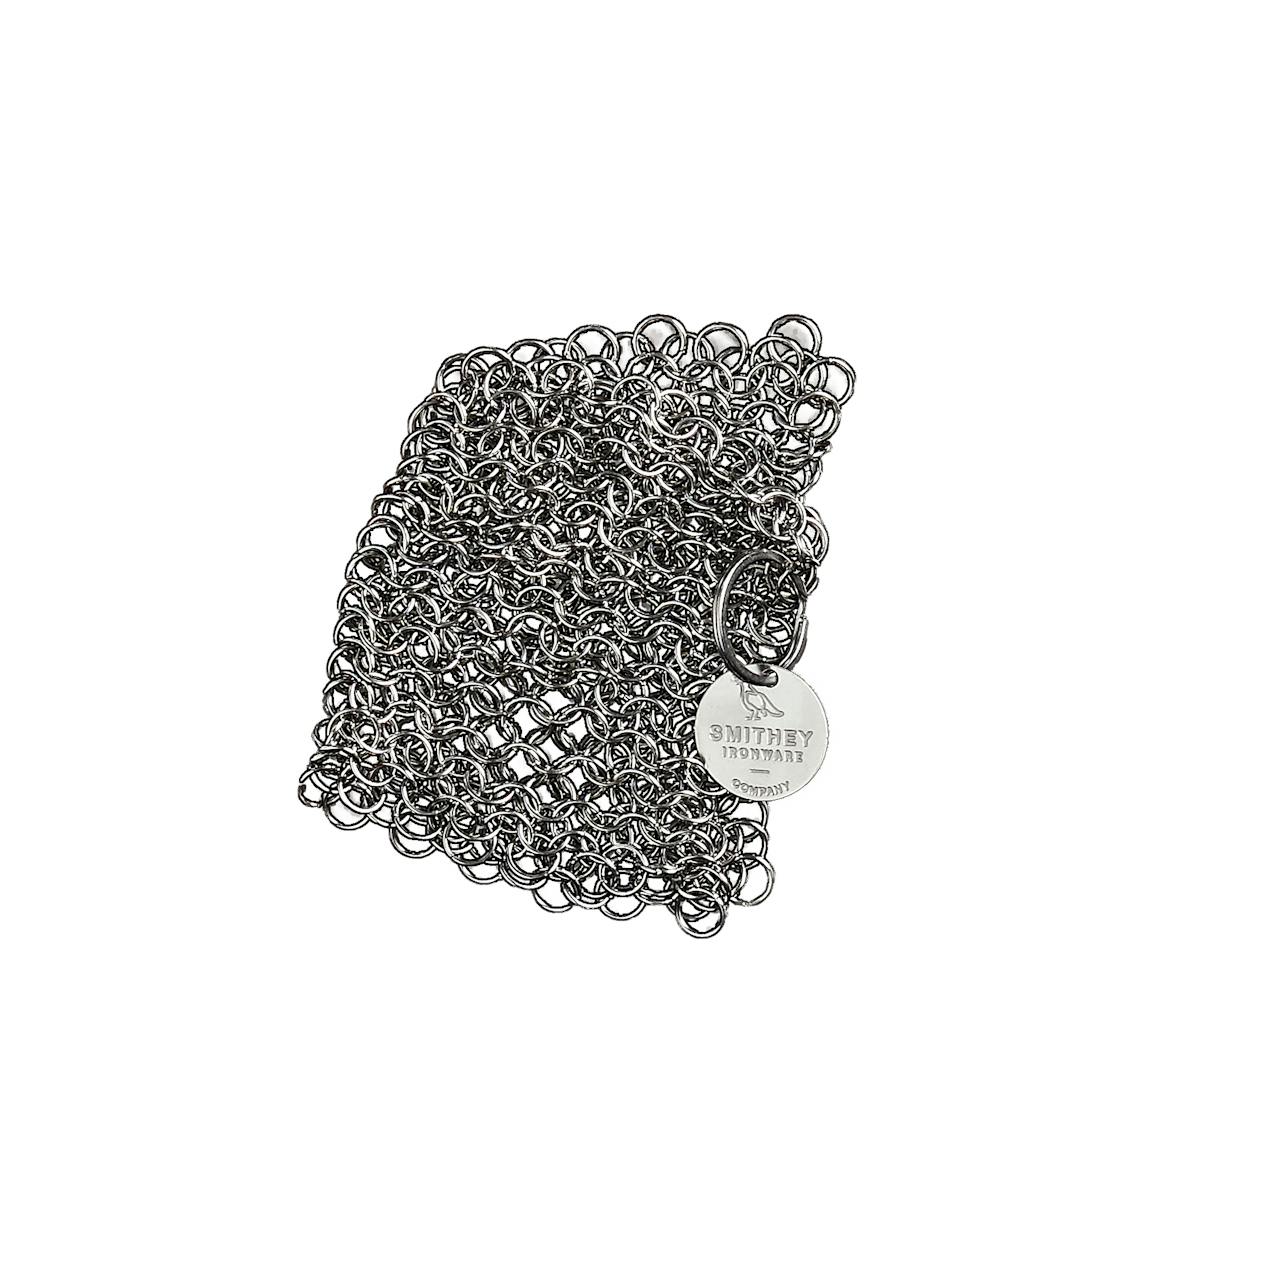 Smithey Ironware Co. Chain Mail Scrubber